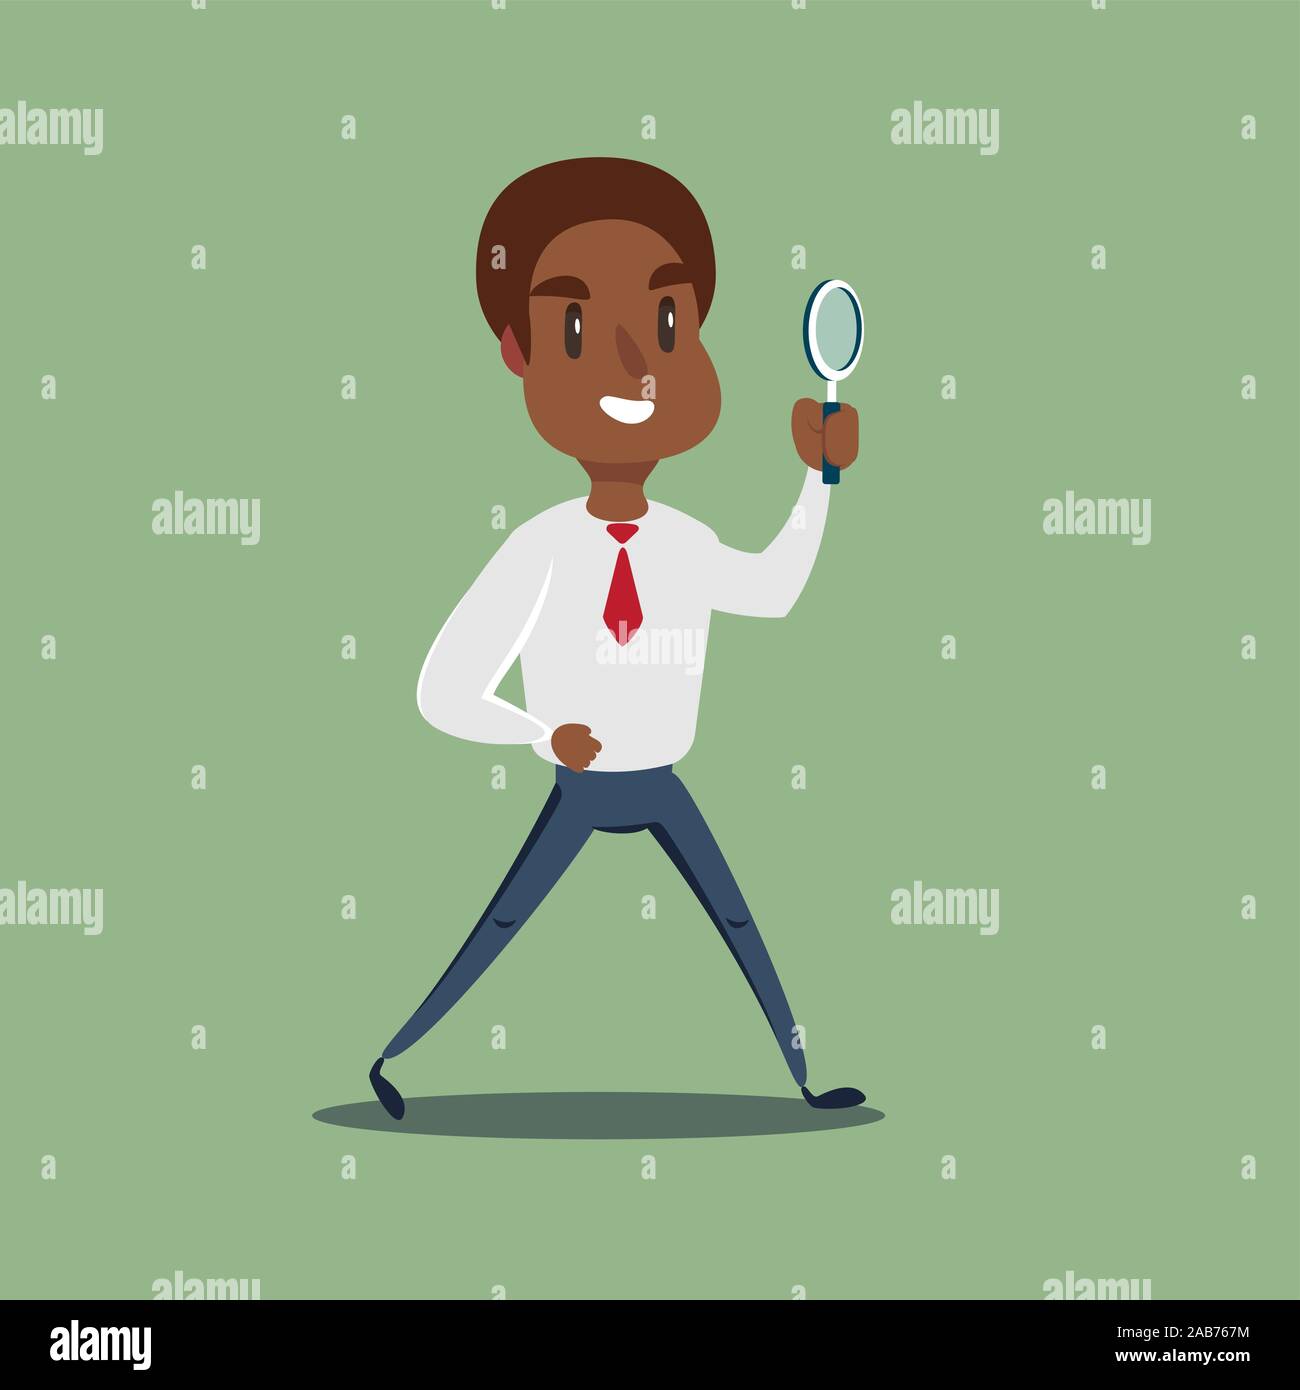 African Manager character looking through a magnifying glass. Stock Vector